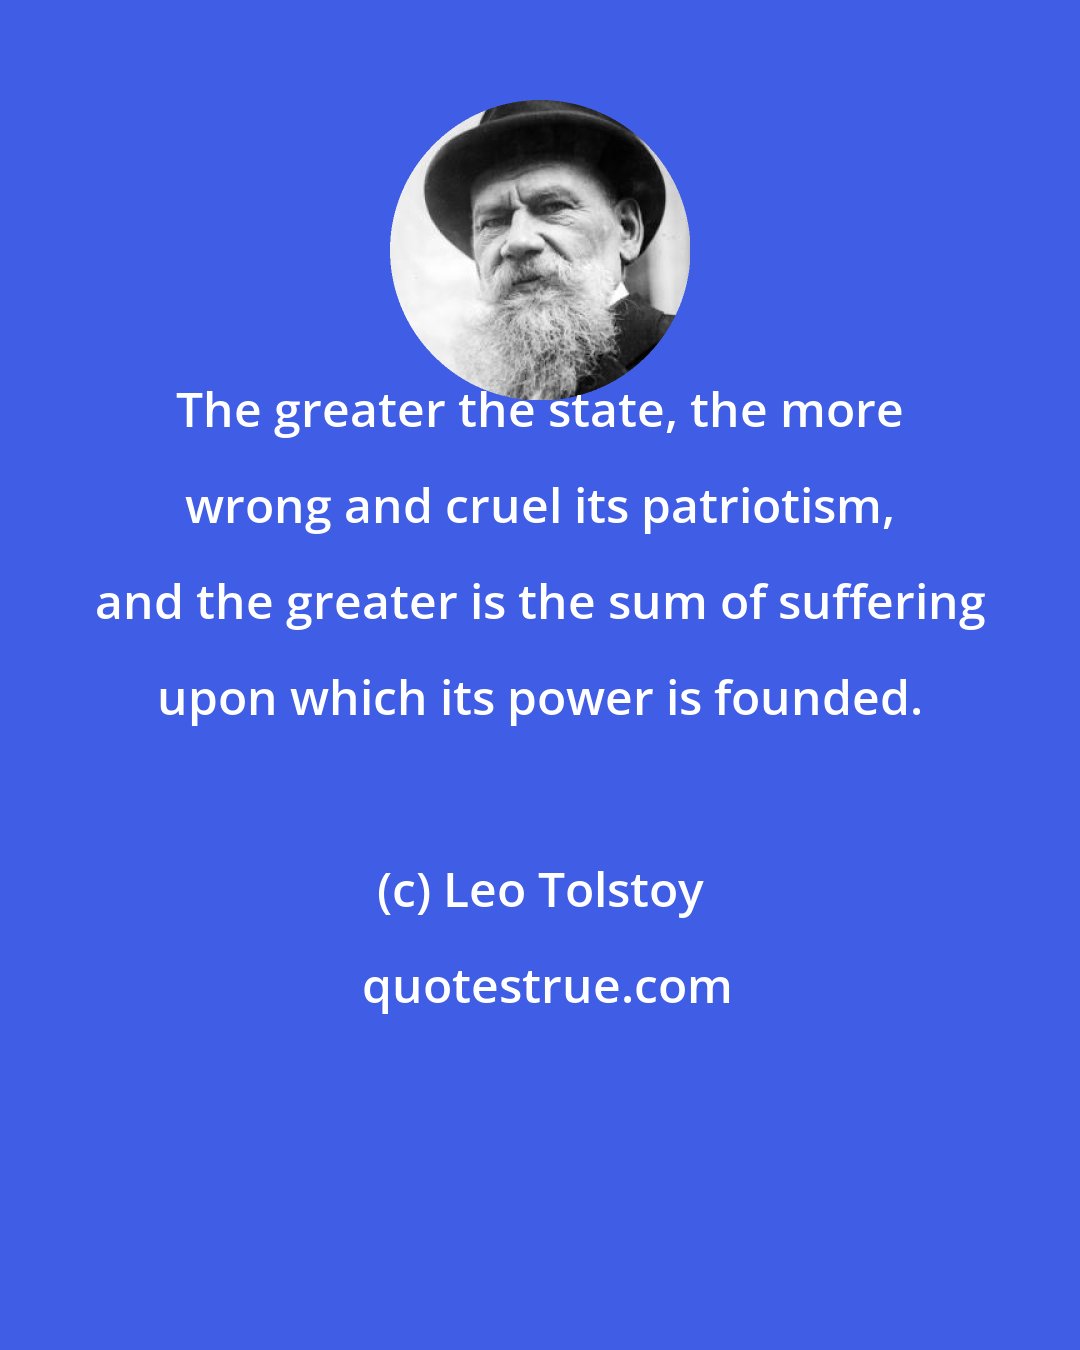 Leo Tolstoy: The greater the state, the more wrong and cruel its patriotism, and the greater is the sum of suffering upon which its power is founded.